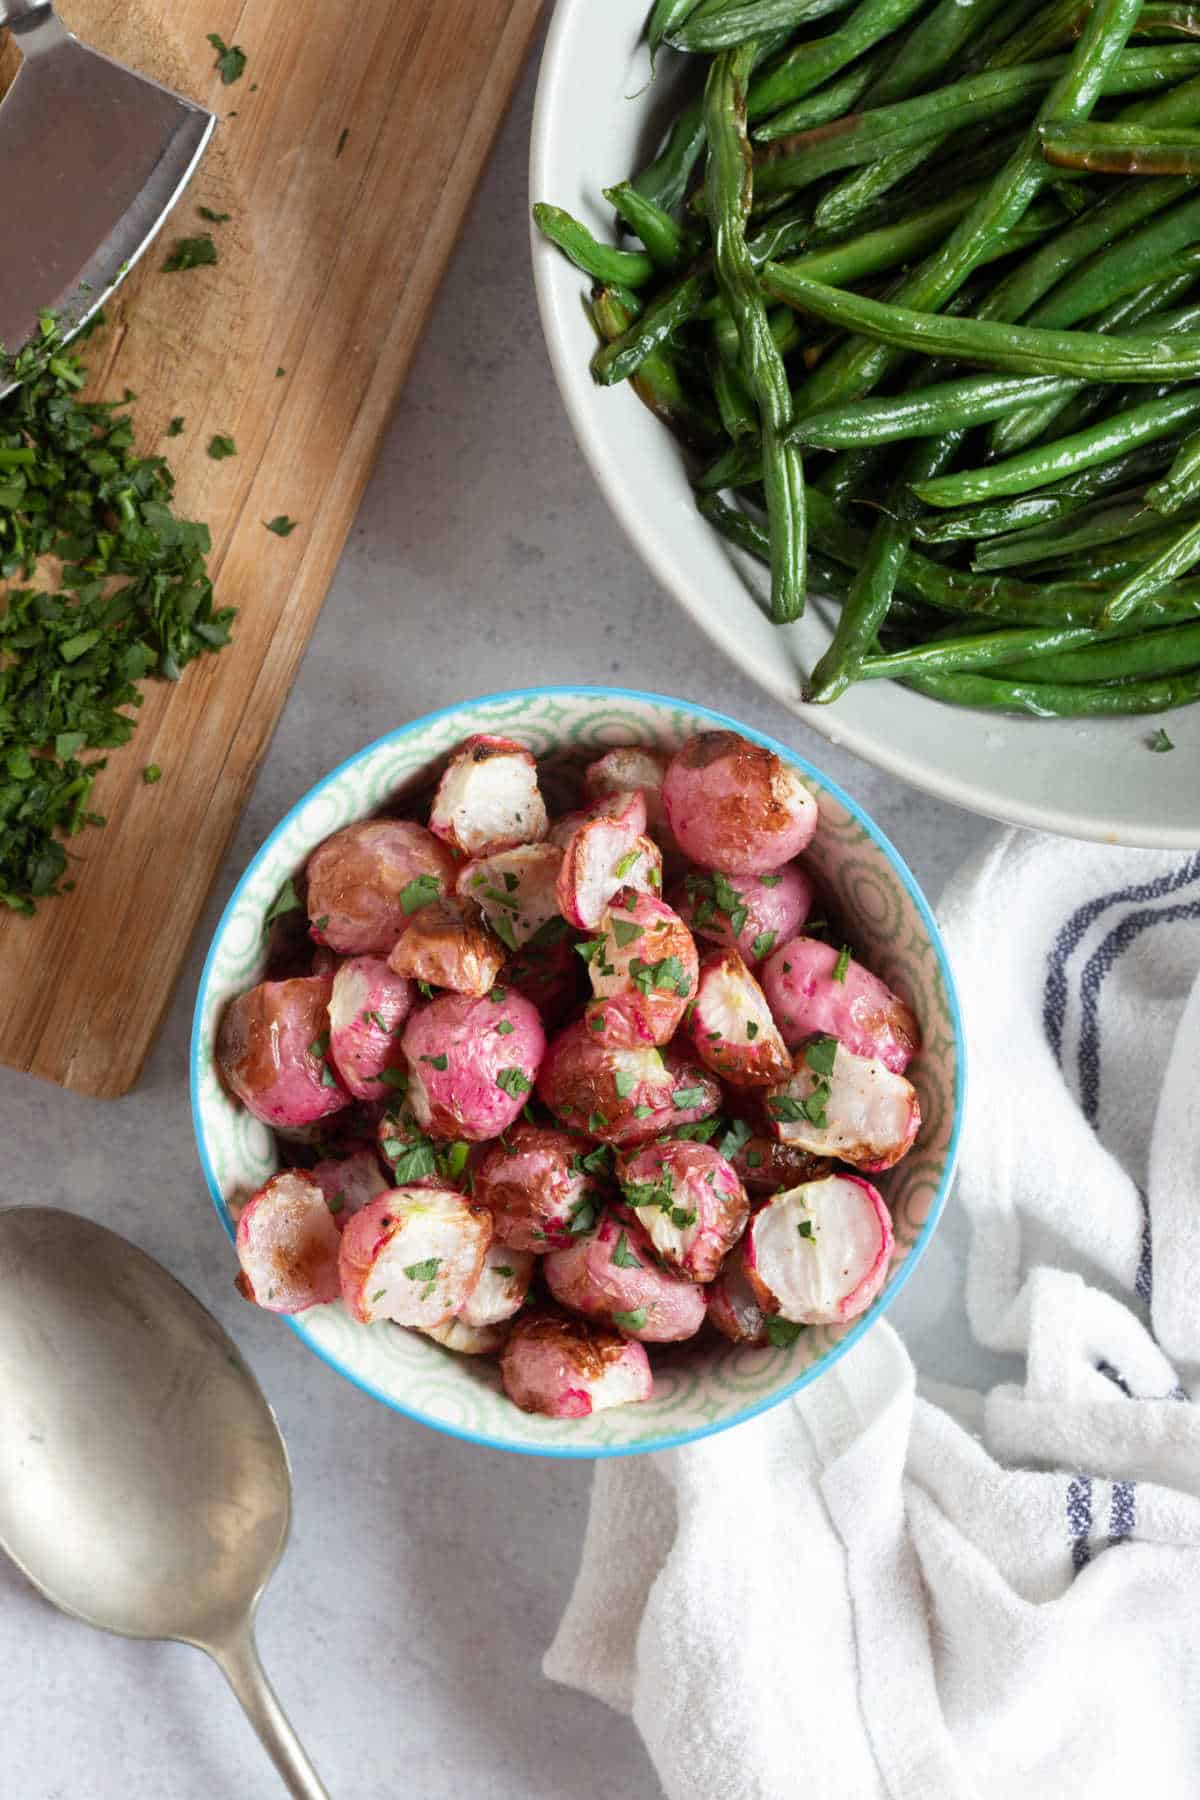 Roasted air fryer radishes sprinkled with chopped parsley.